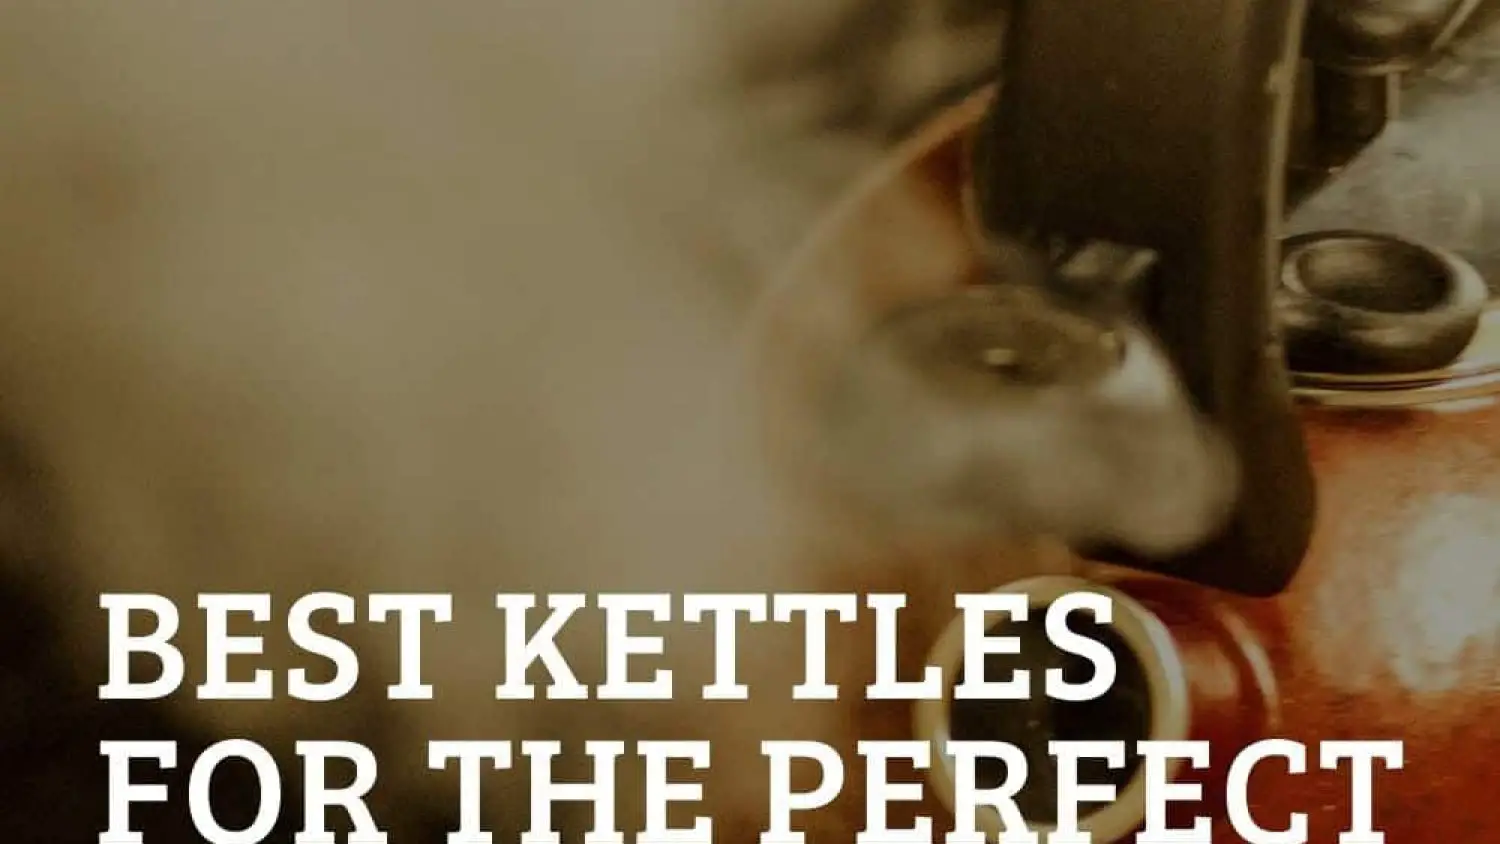 The Best Kettles for the Perfect Brew